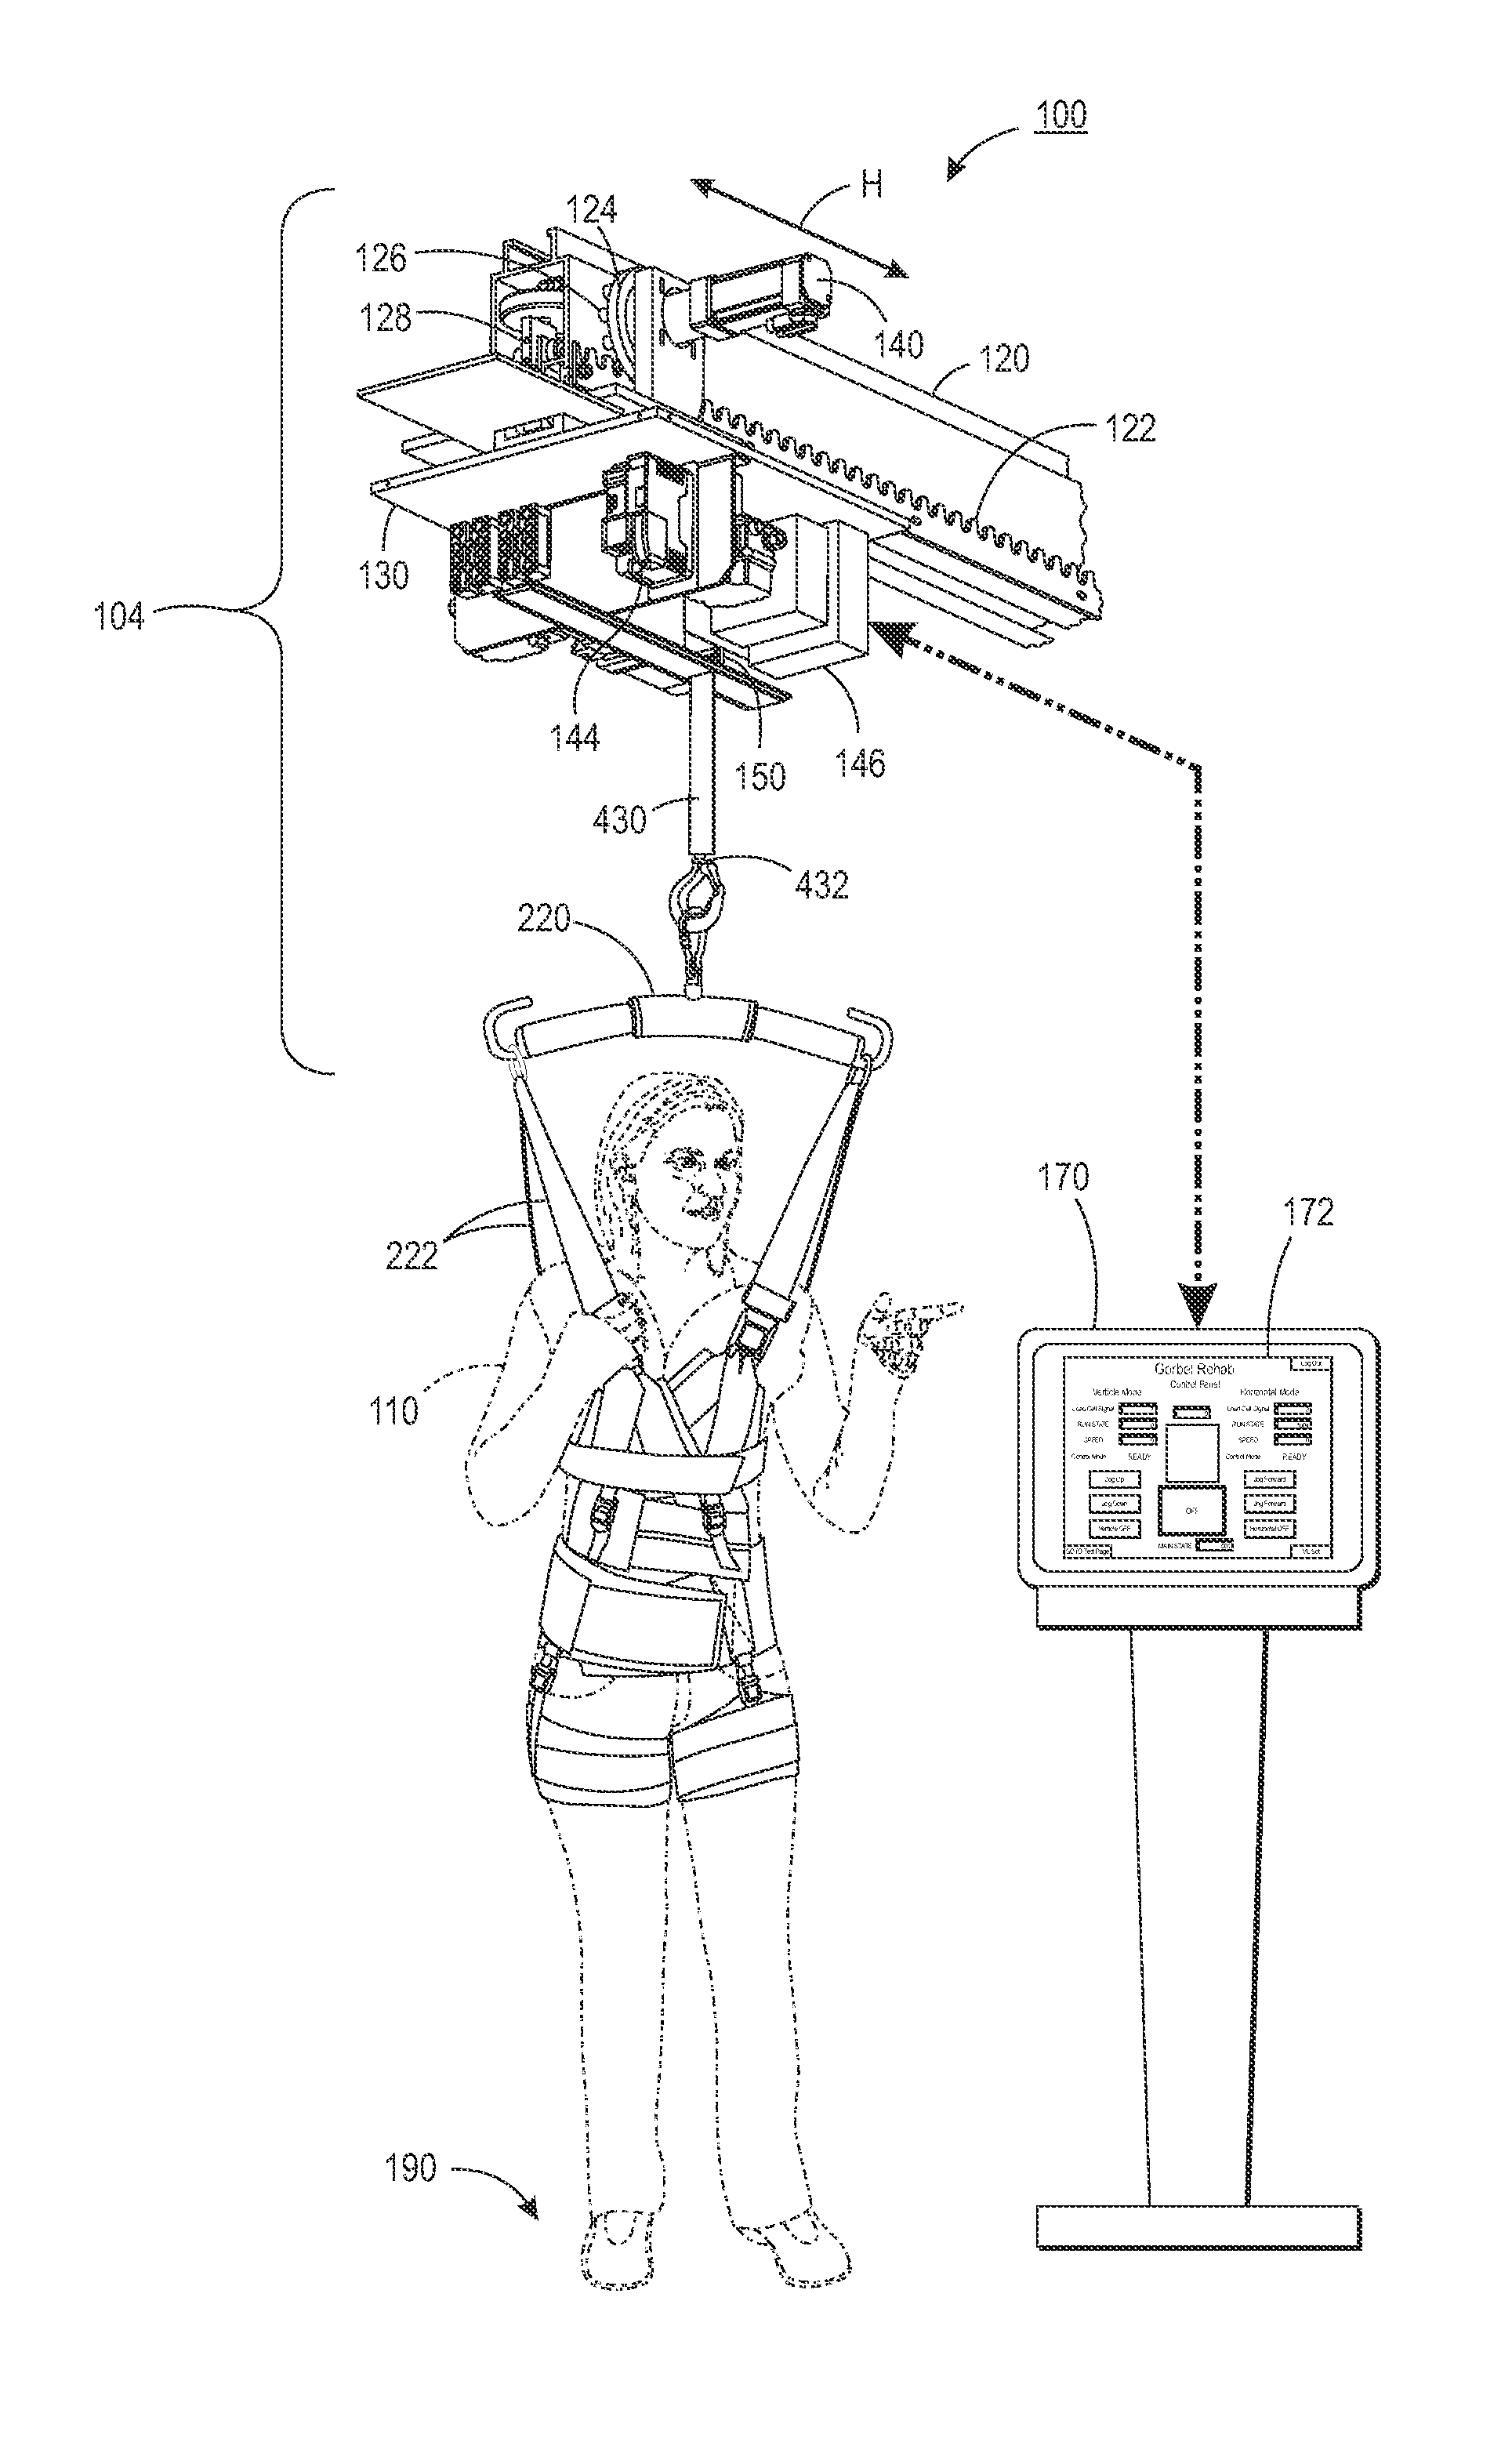 Medical rehab lift system and method with horizontal and vertical force sensing and motion control